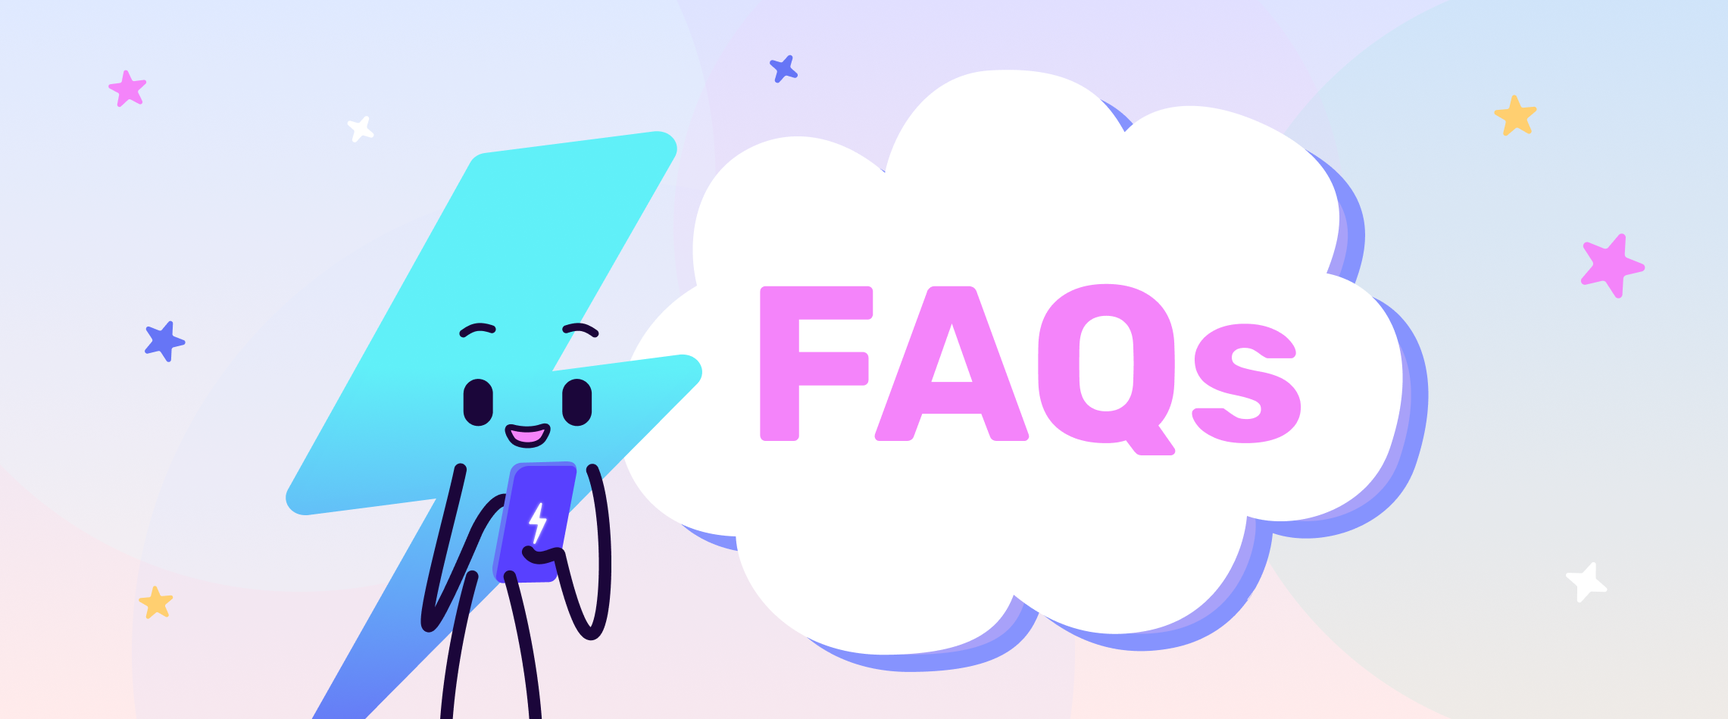 FAQs header with zapman on phone